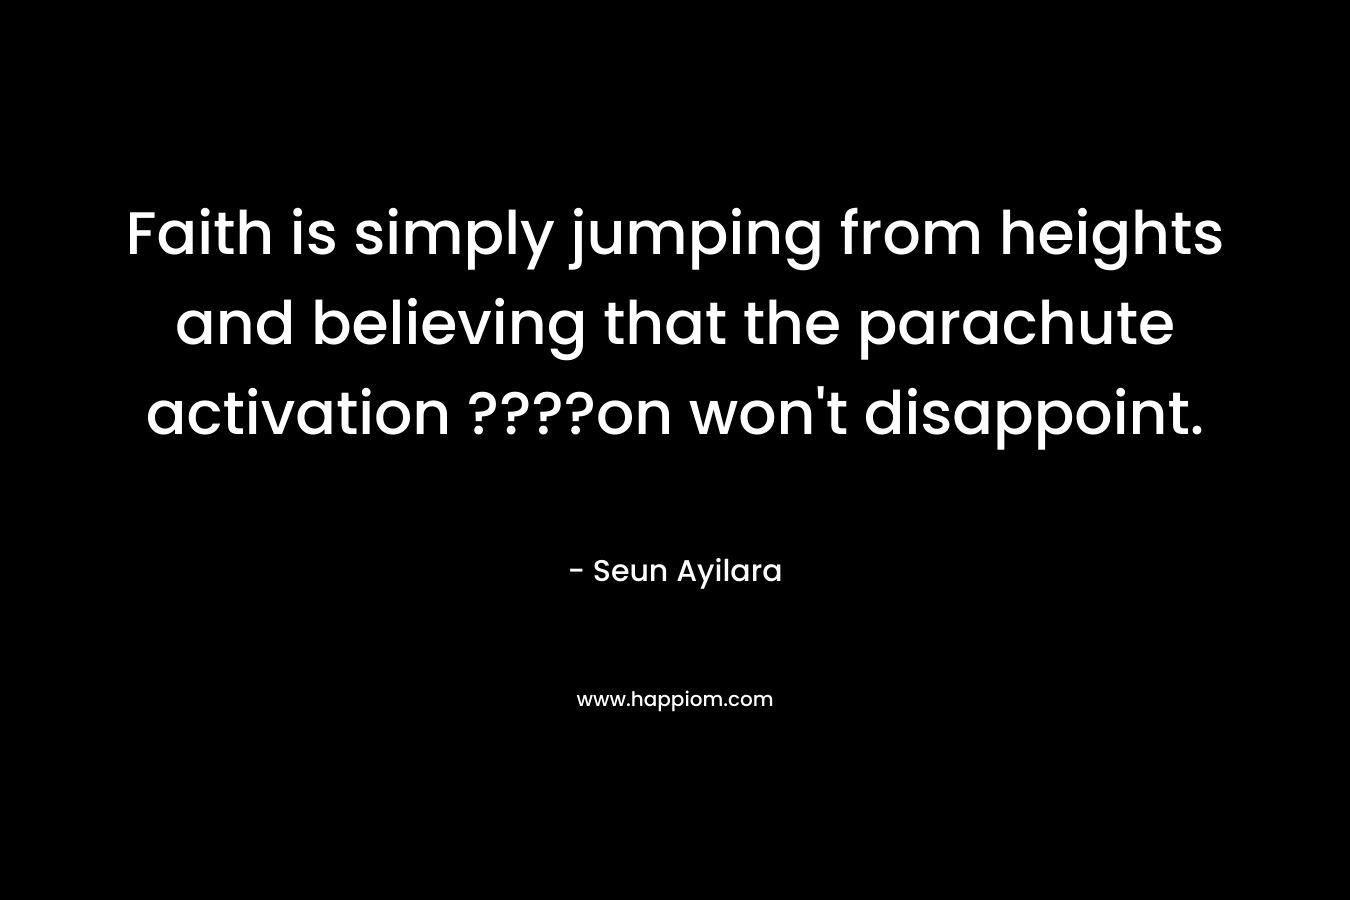 Faith is simply jumping from heights and believing that the parachute activation ????on won't disappoint.